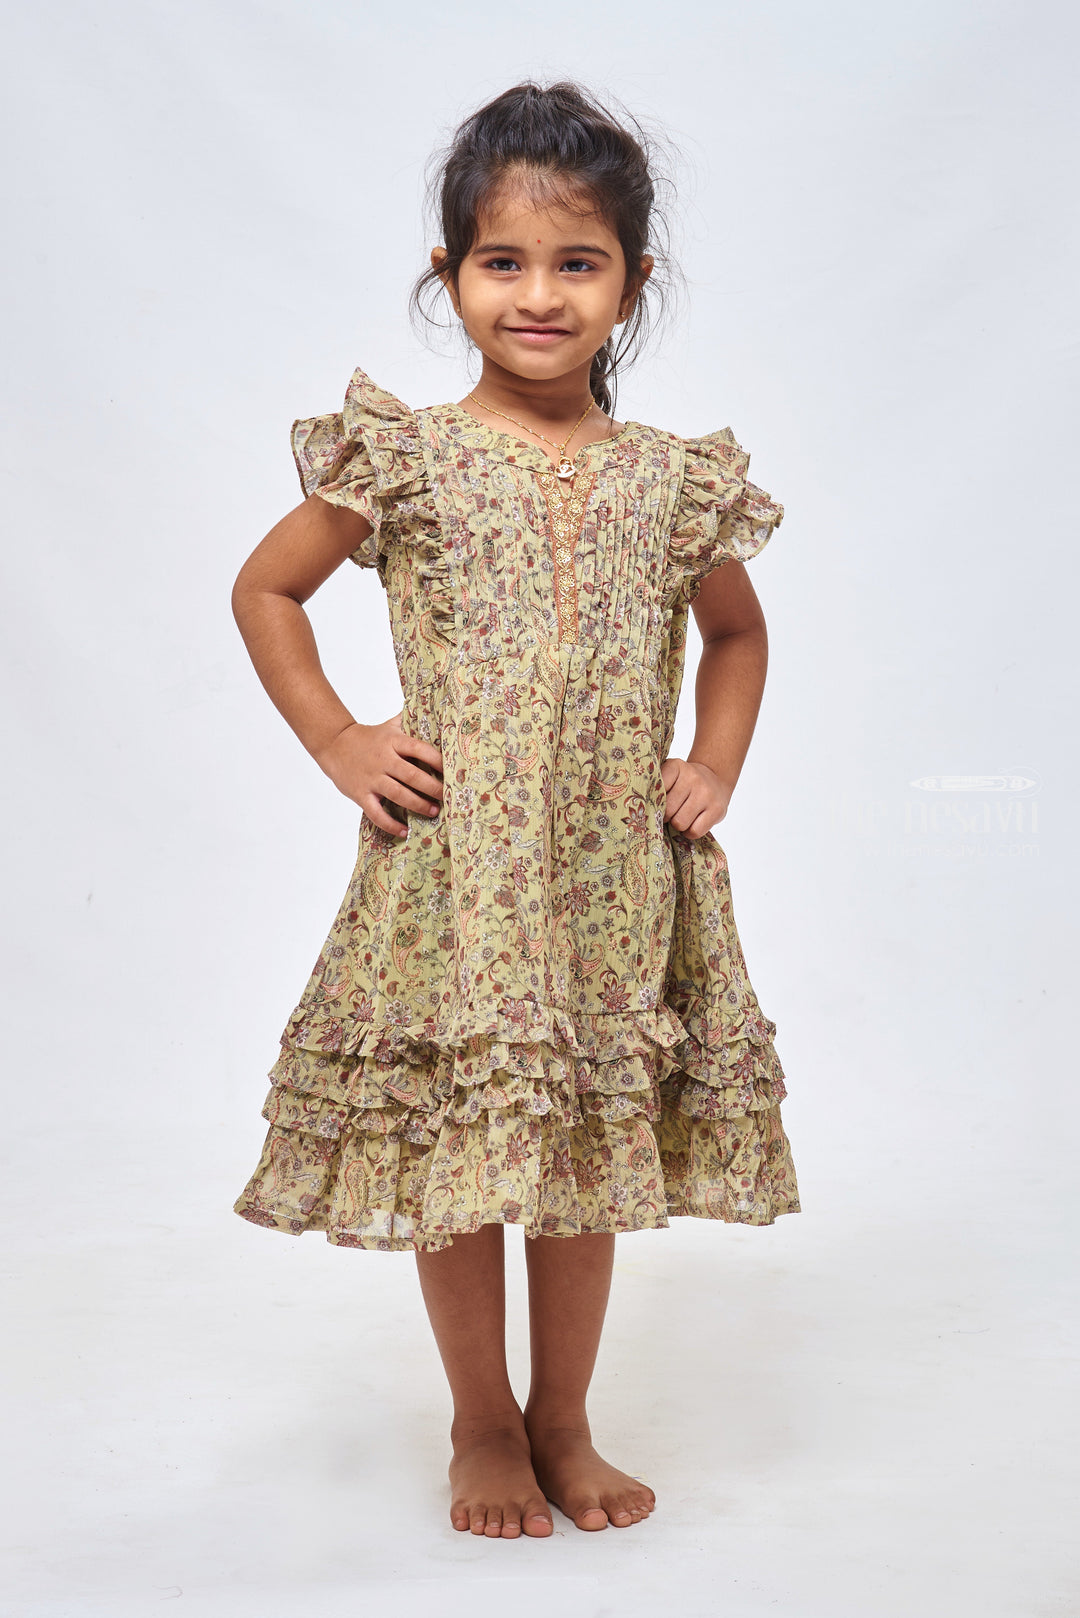 The Nesavu Girls Cotton Frock Green Sequin Splendor: Cotton Frock with Floral Accents Nesavu 22 (4Y) / Green / Georgette GFC1131A-22 Cotton Gown Frock | 1 Year Baby Girl Cotton Dresses | the Nesavu